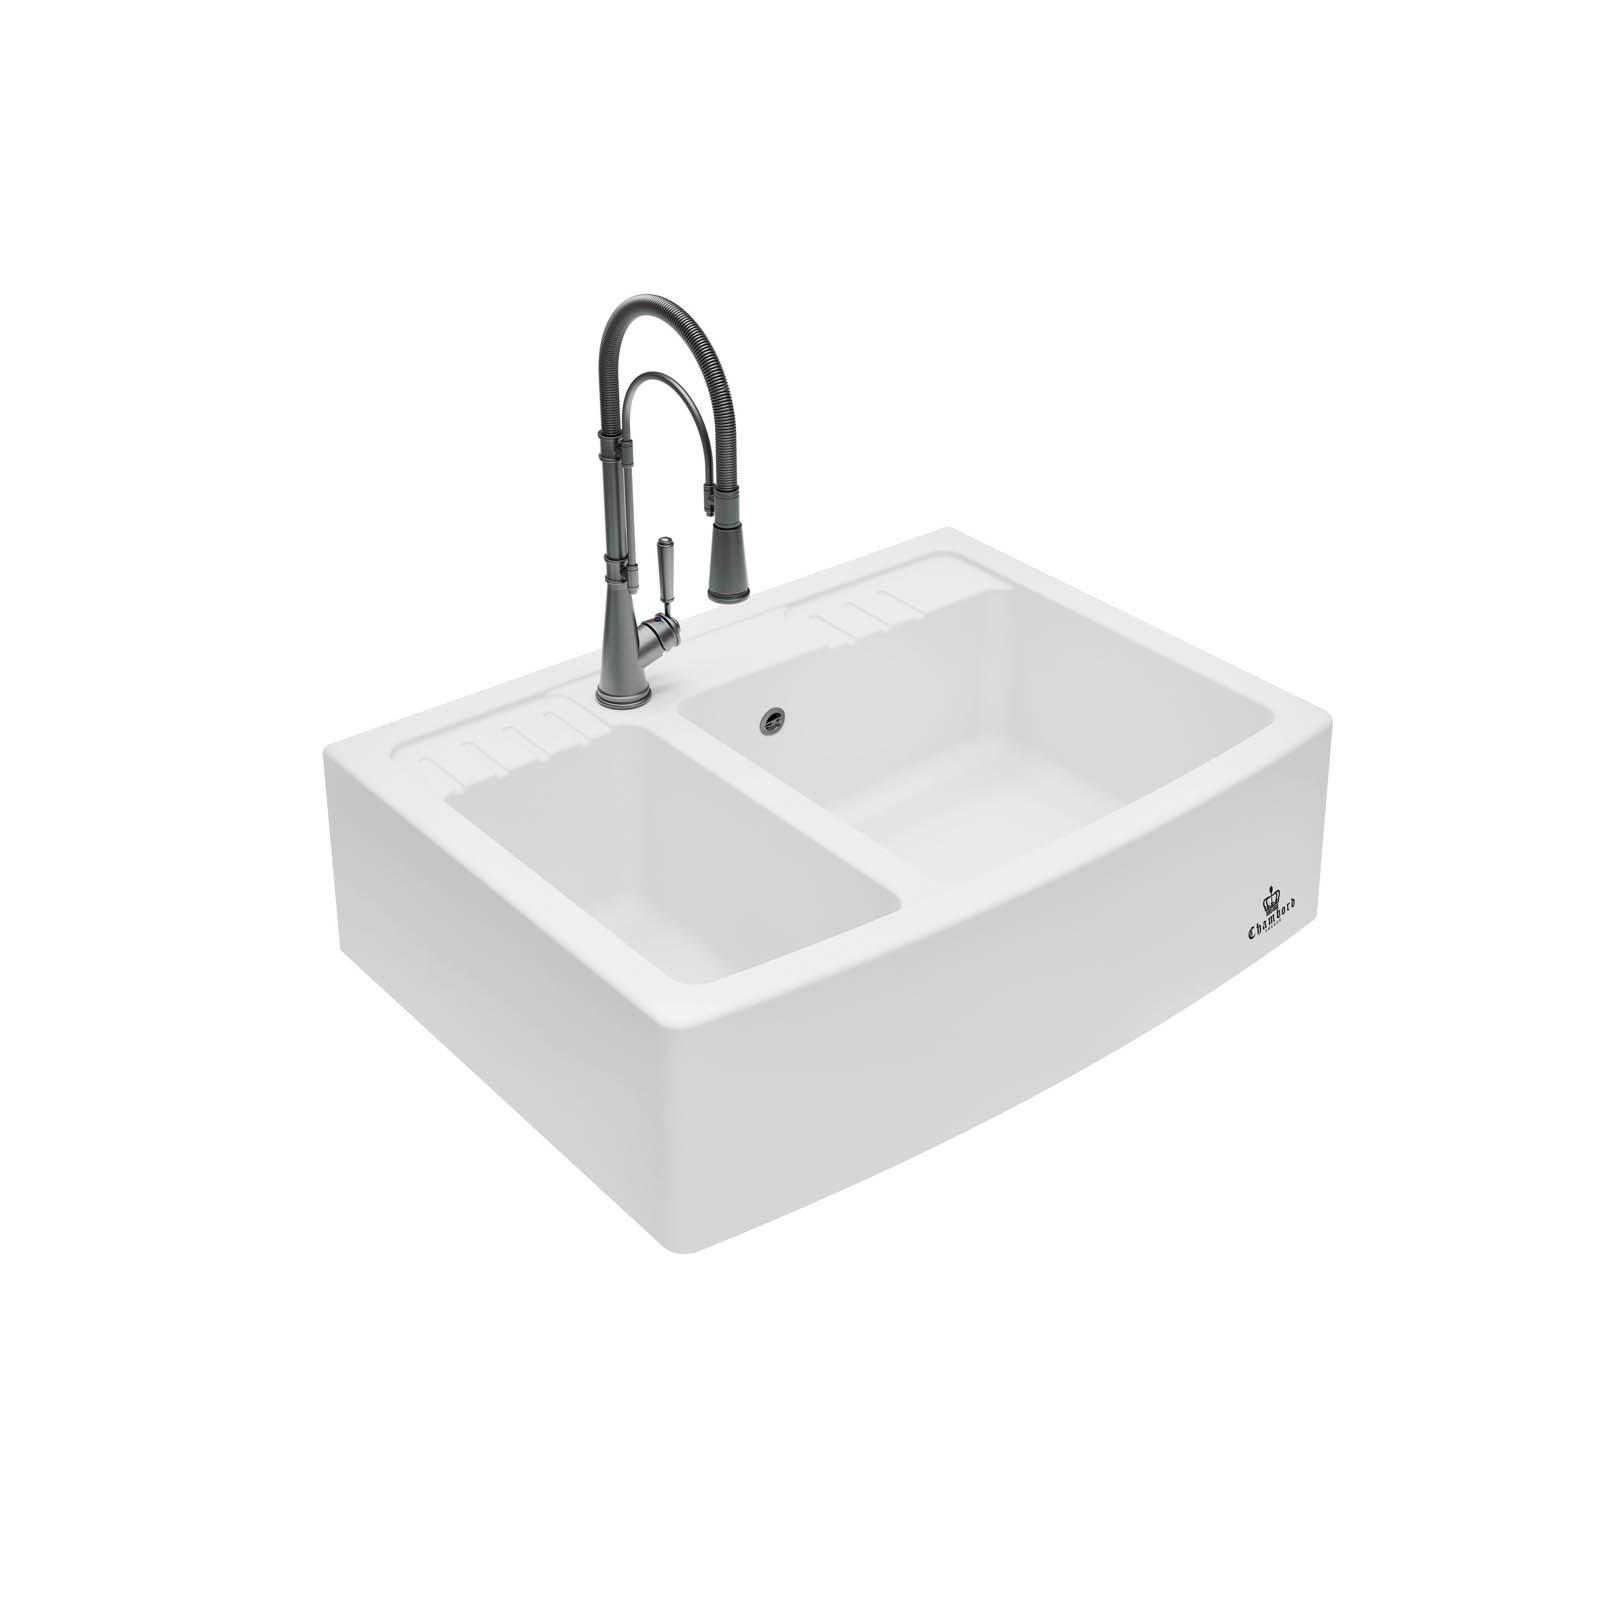 High-quality sink Clotaire III granit white - one and a half bowl